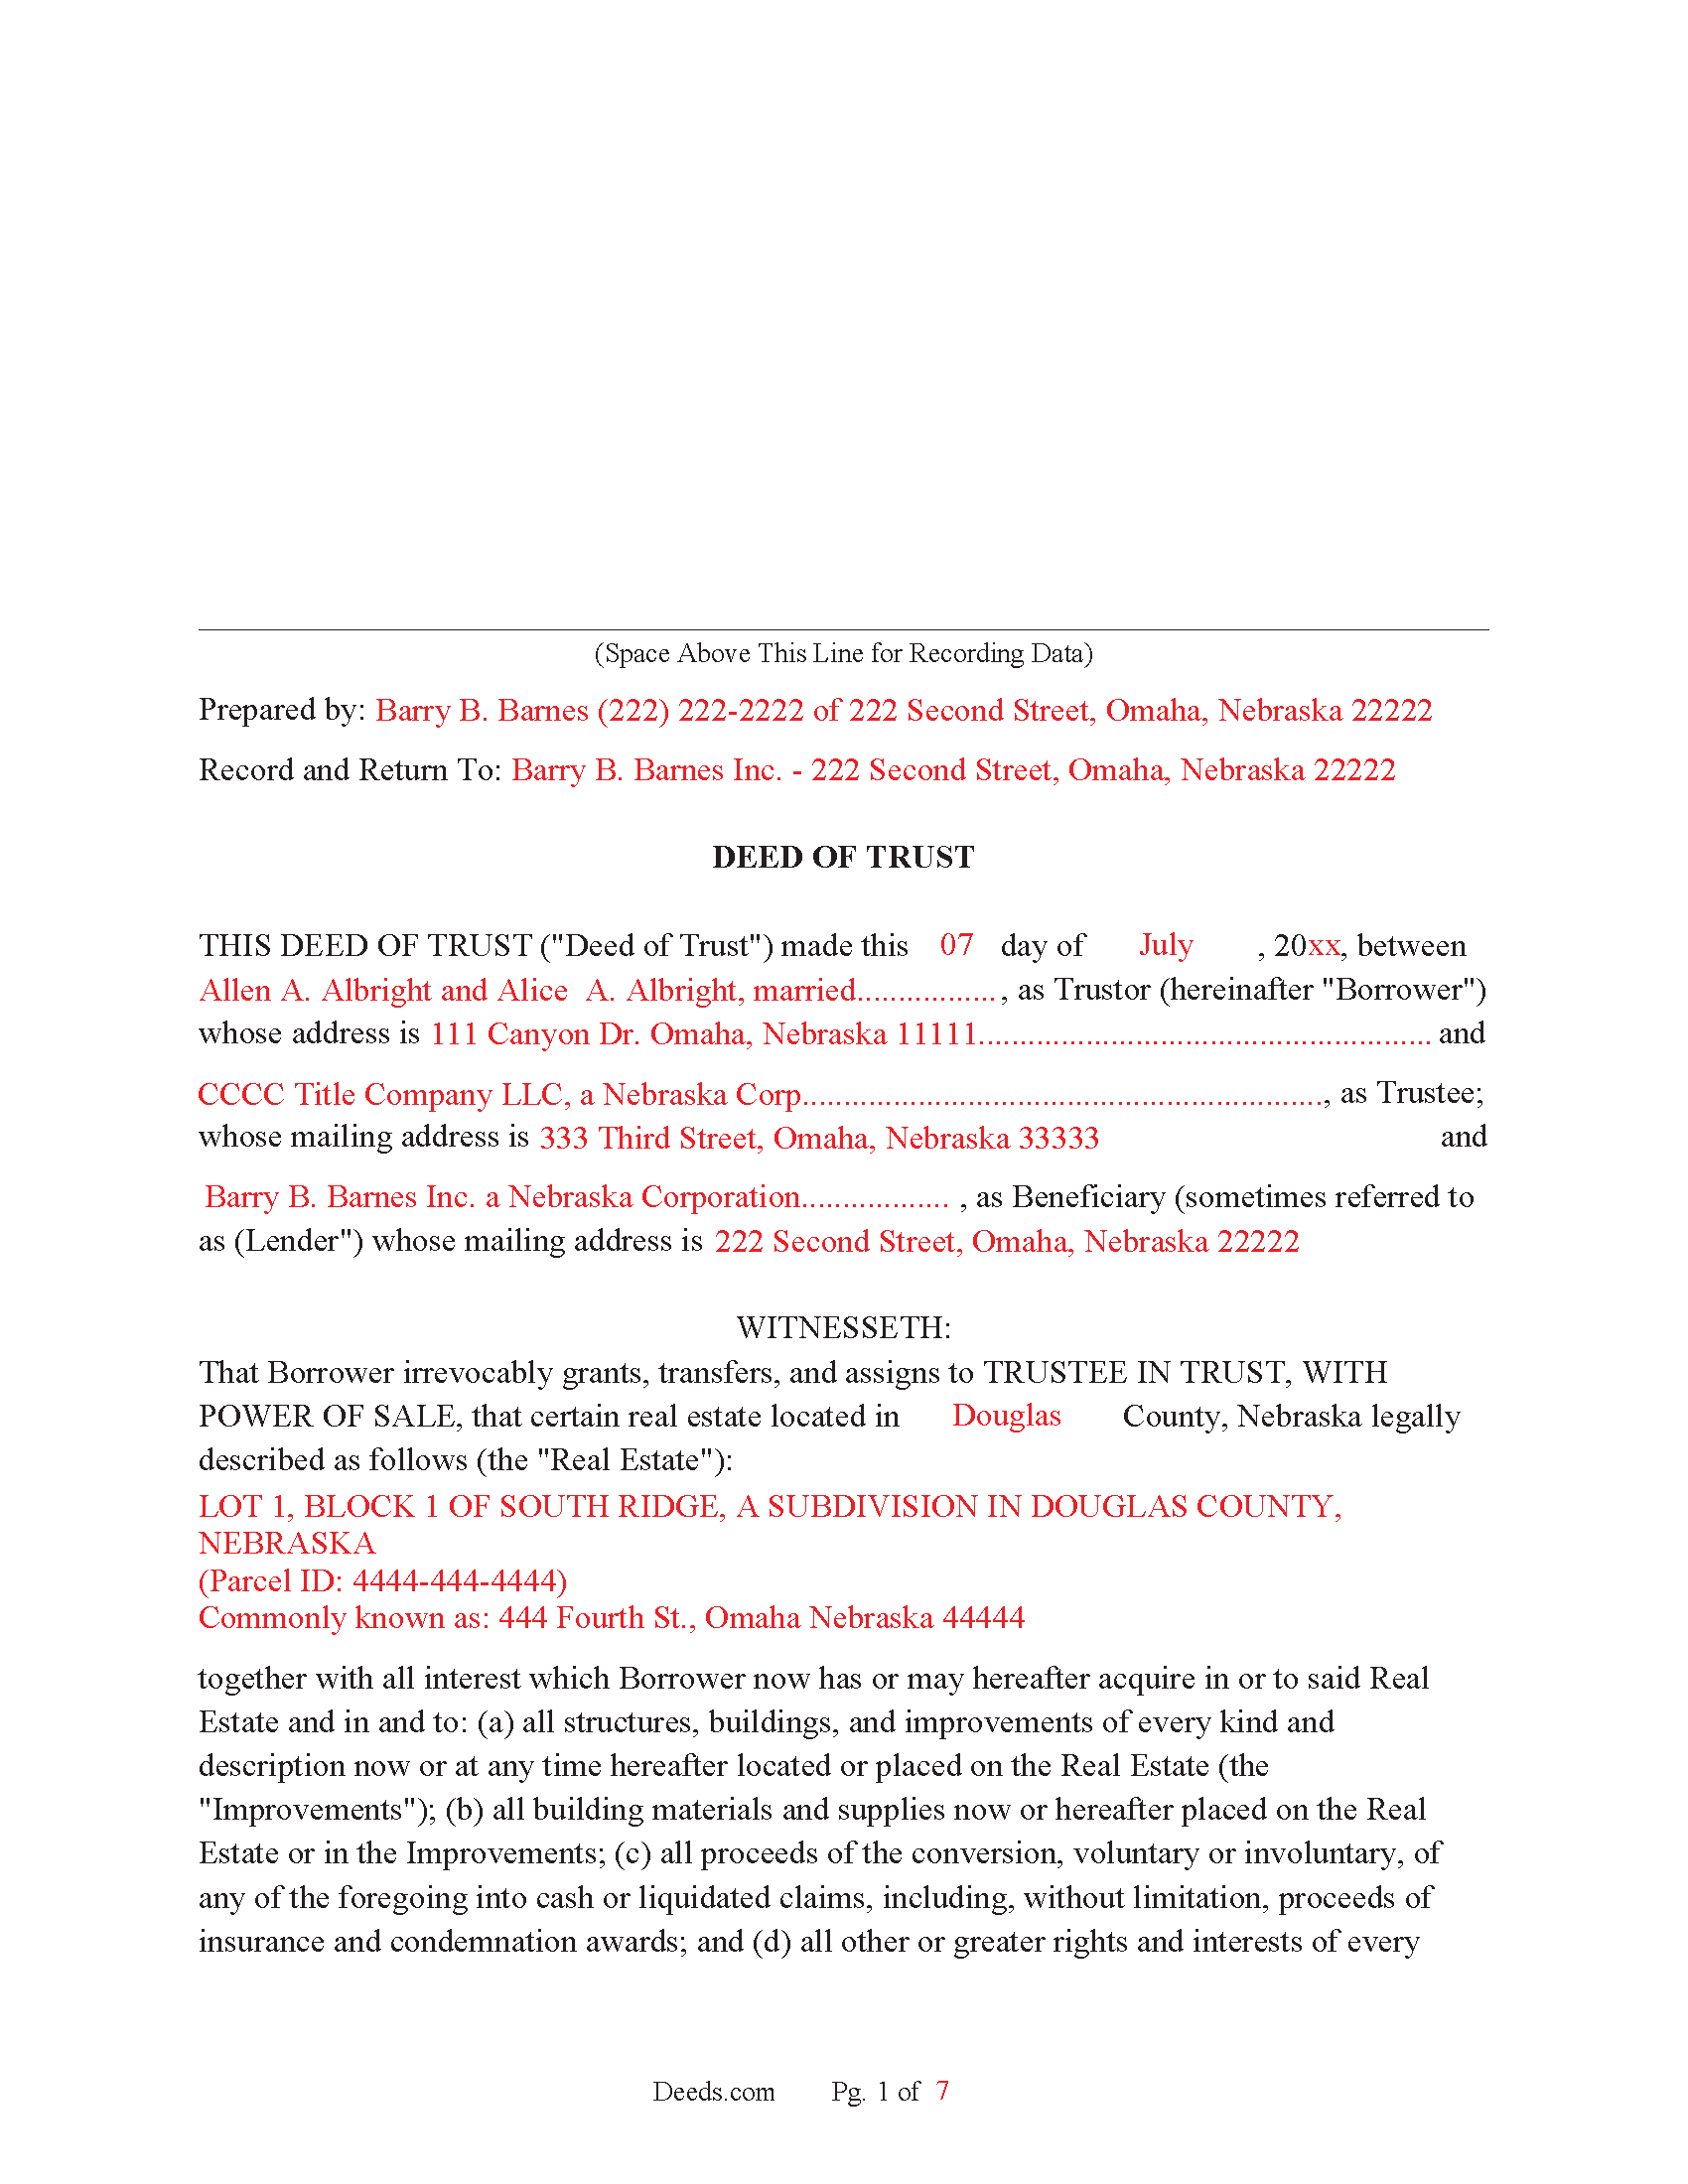 Completed Example of the Deed of Trust Document